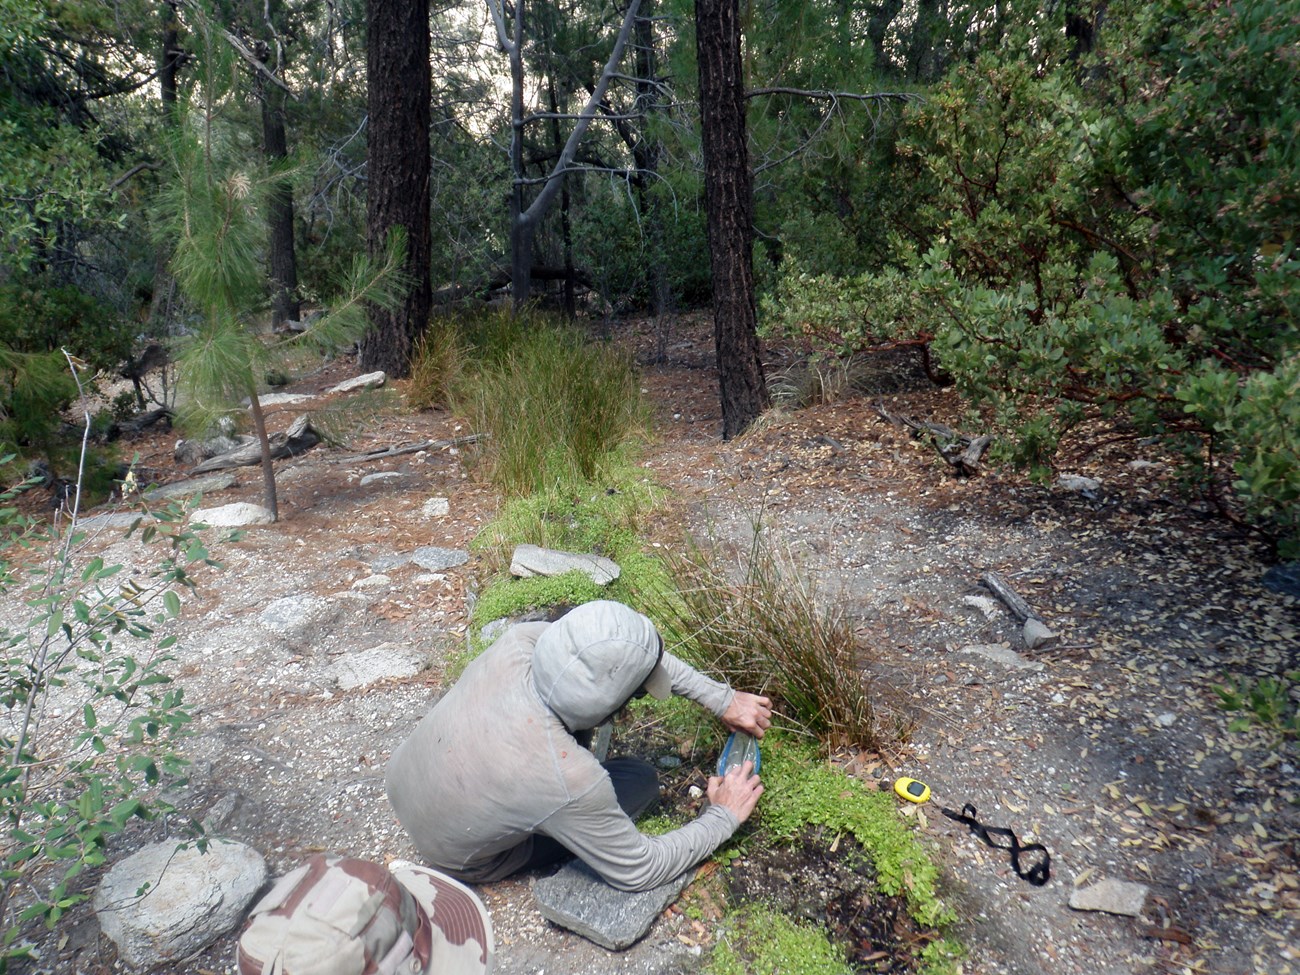 A person collecting a water sample from a narrow trickle of water lined by aquatic plants on a conifer forest floor.